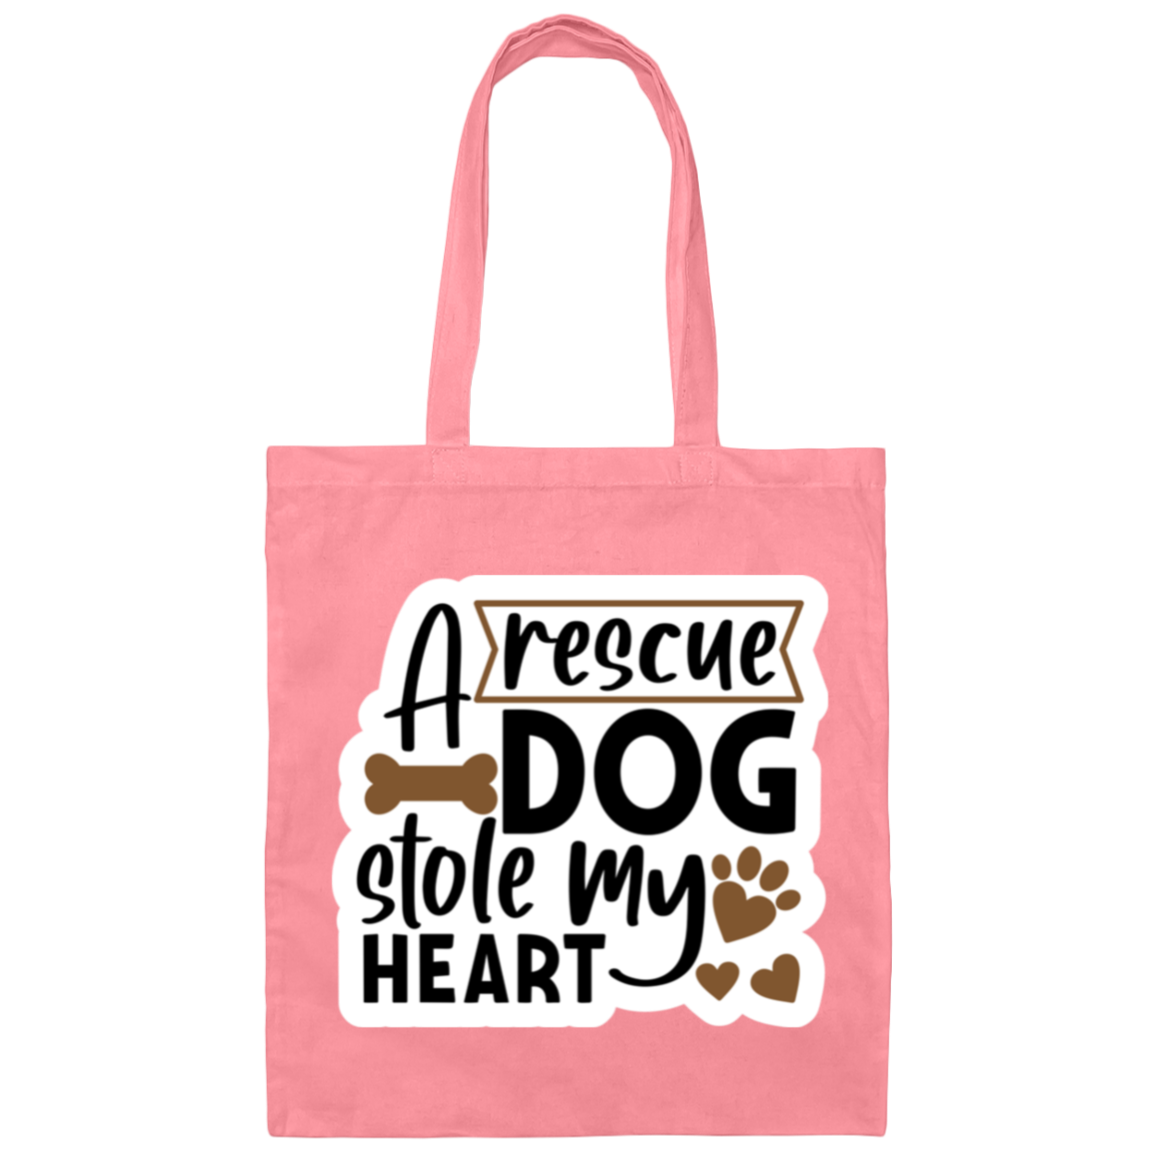 A Rescue Dog Stole My Heart Canvas Tote Bag